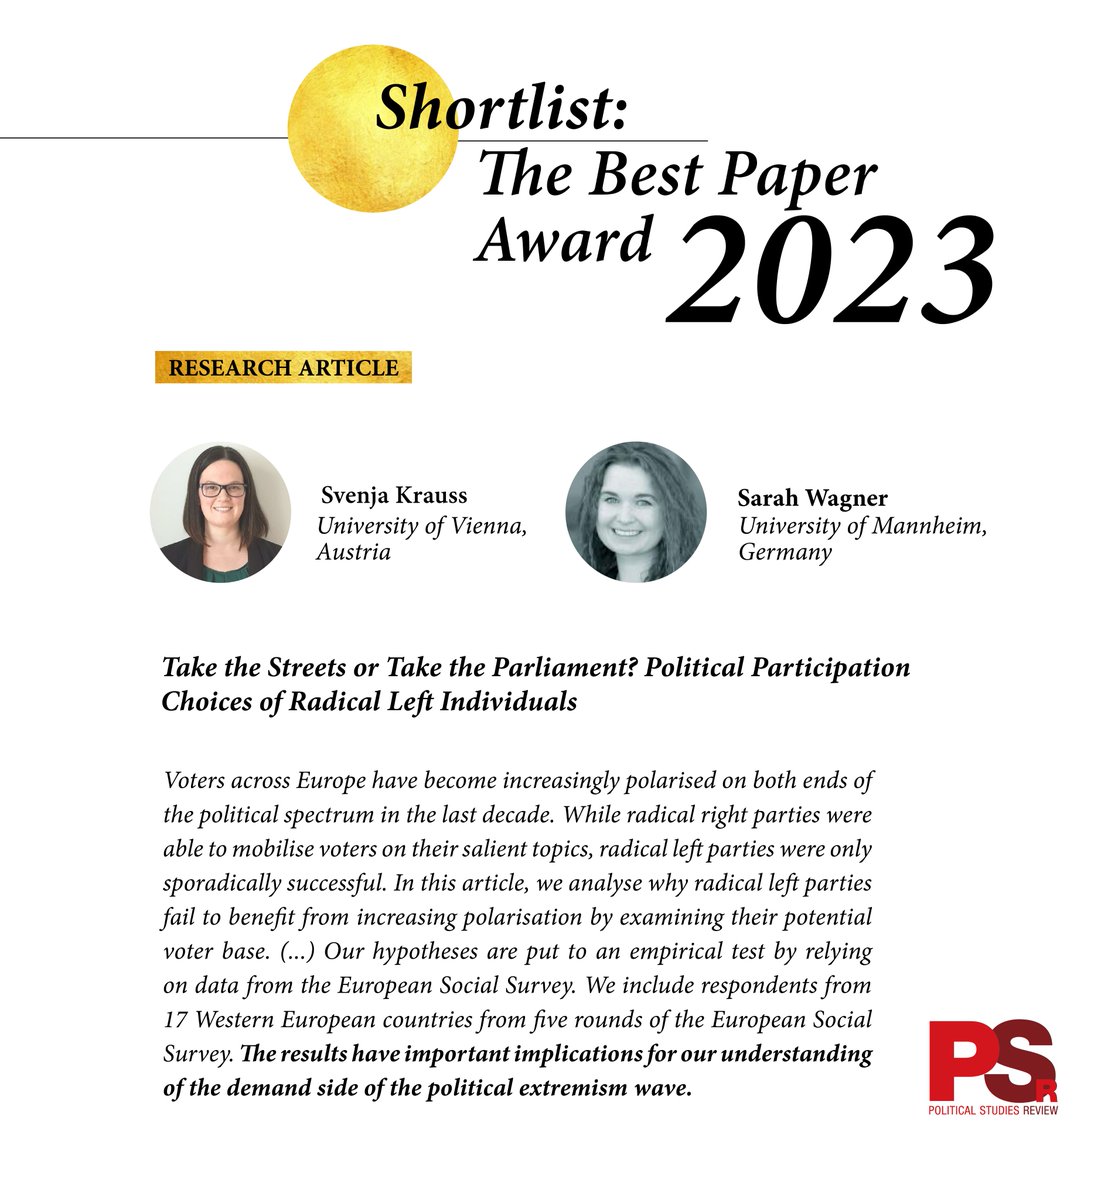 🔻A shortlist: PSR Best Paper Award 2023🔻 @Svenja_Krauss and @SarahWagnerPhD analyse why radical #left parties fail to benefit from increasing polarisation by examining their potential voter base. 👉More: tiny.cc/3f84xz @PolStudiesAssoc